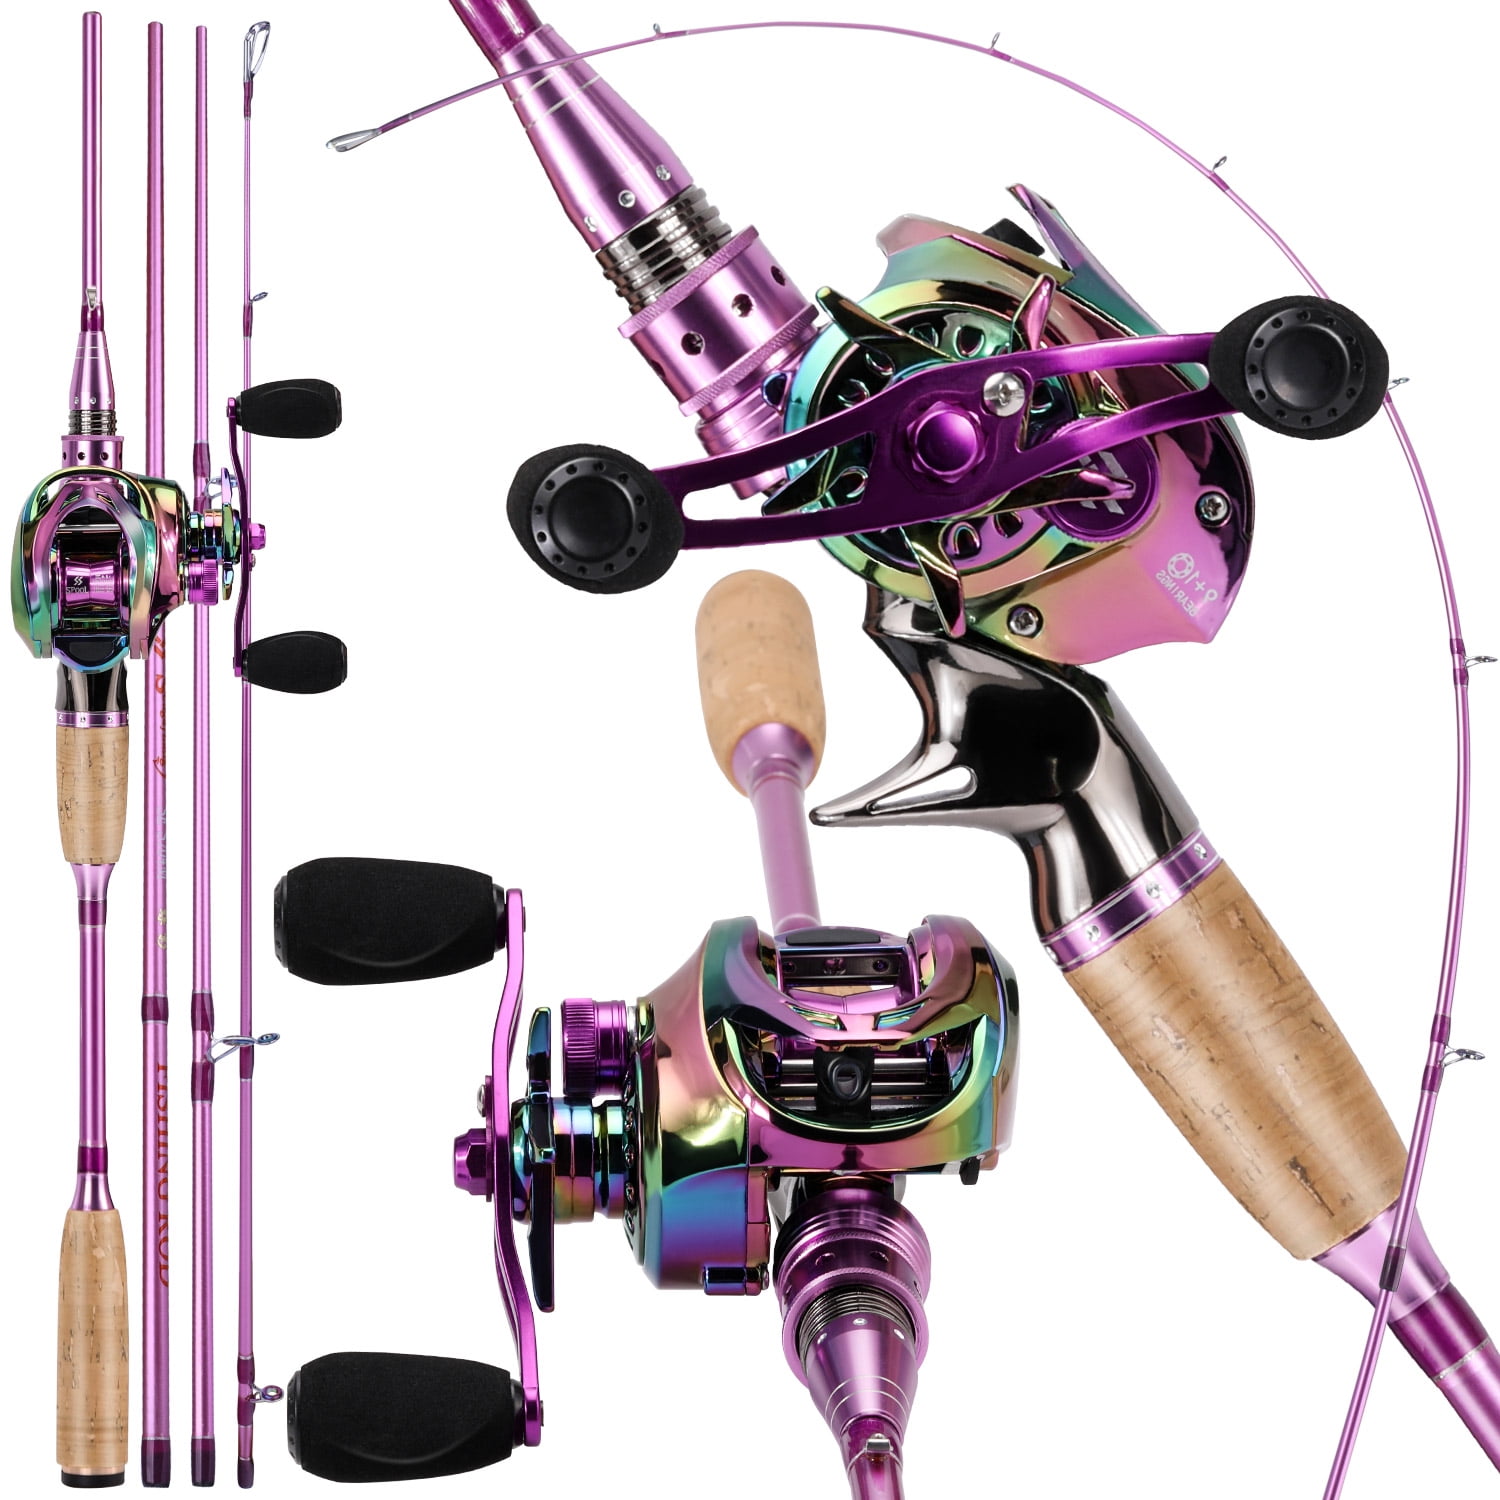 Sougayilang Spinning/Casting Fishing Rod and Reel Combo Carbon